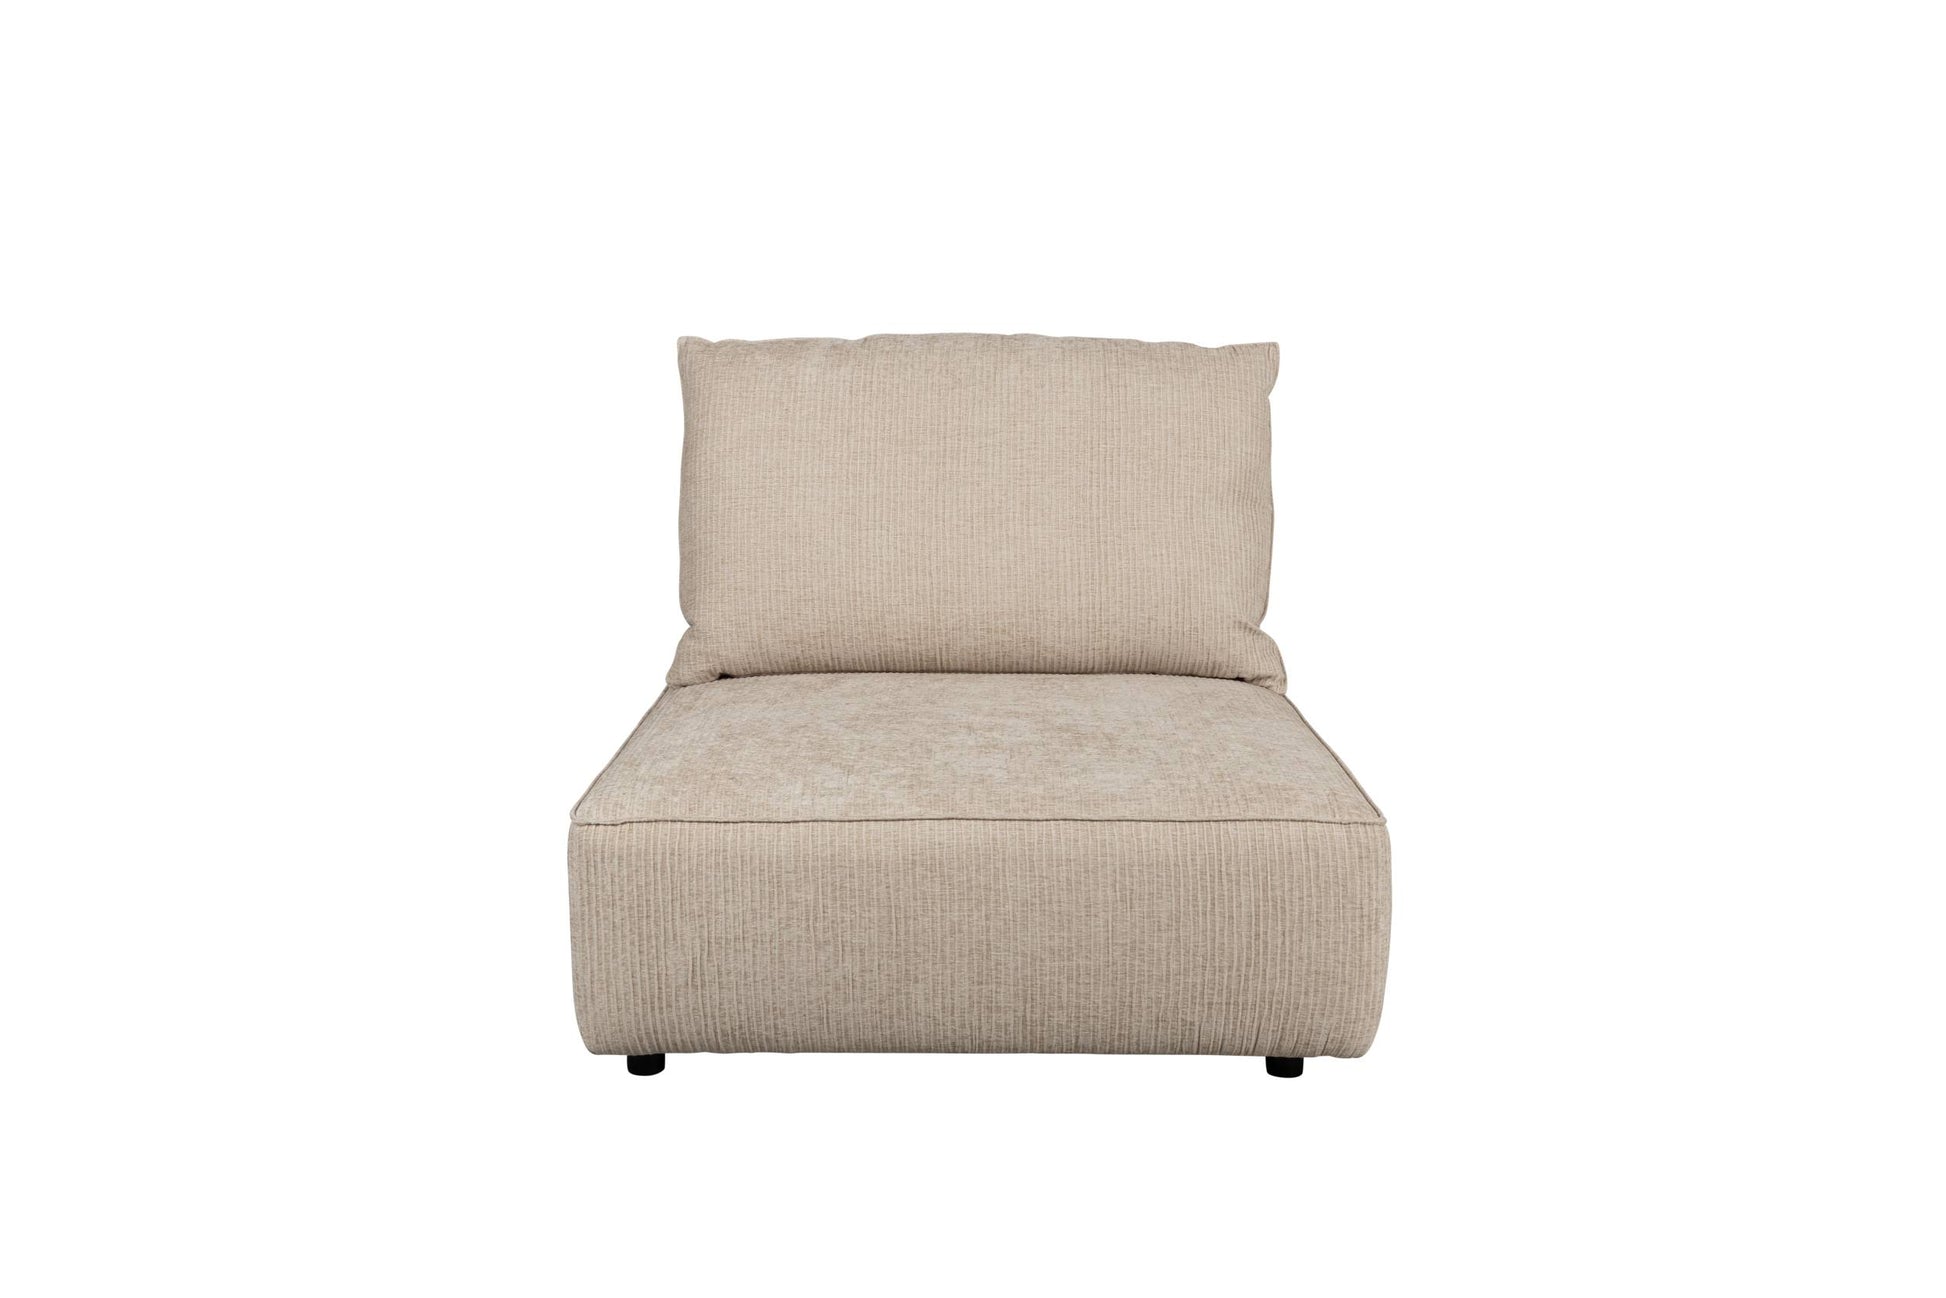 Zuiver | SOFA ELEMENT HUNTER 1,5-SEATER WITH BACK SAND Default Title